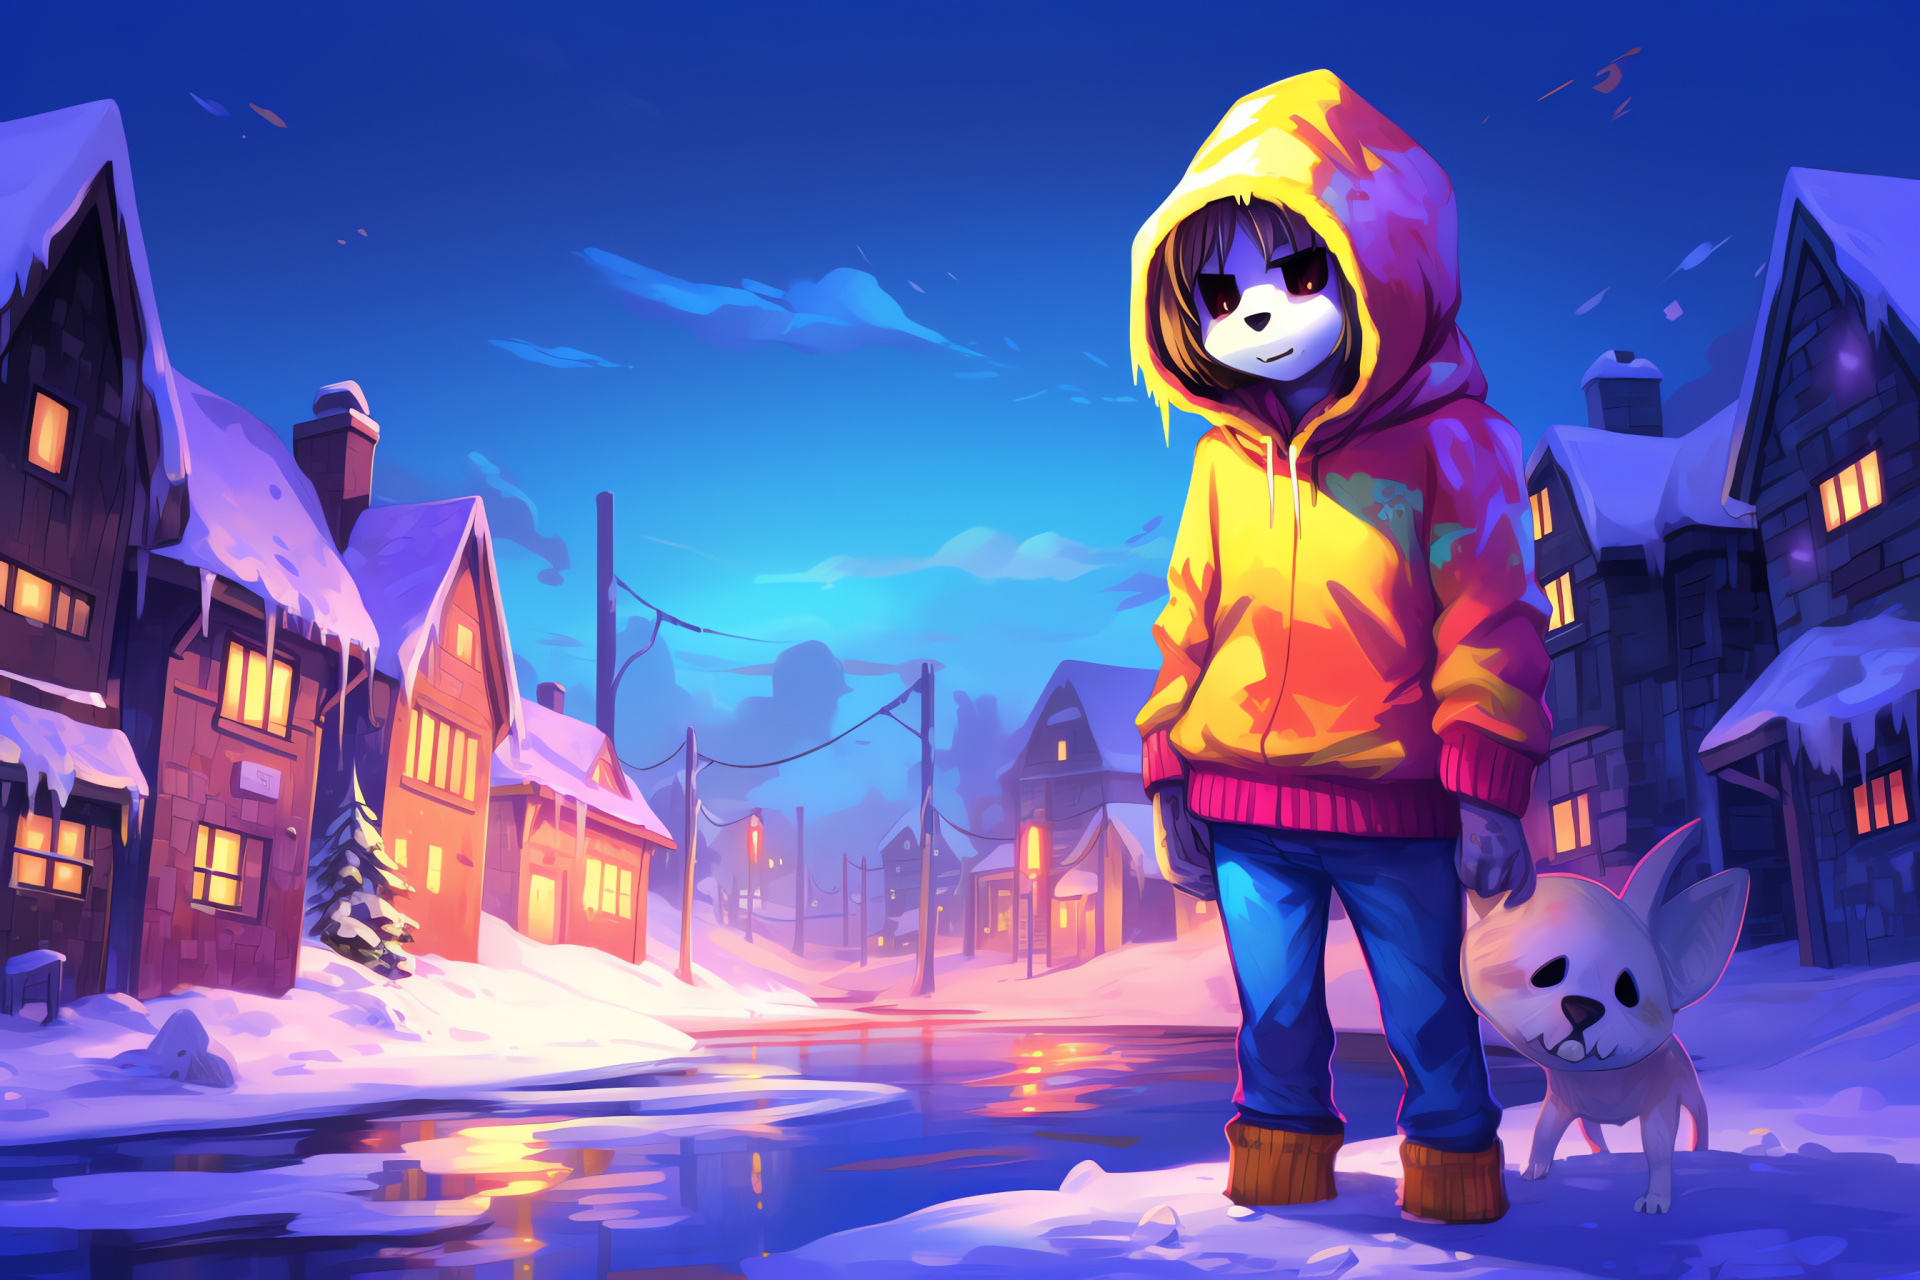 Undertale protagonists Frisk, Sans the skeleton, Brotherly Papyrus, Virtual realm, Player interaction, HD Desktop Image